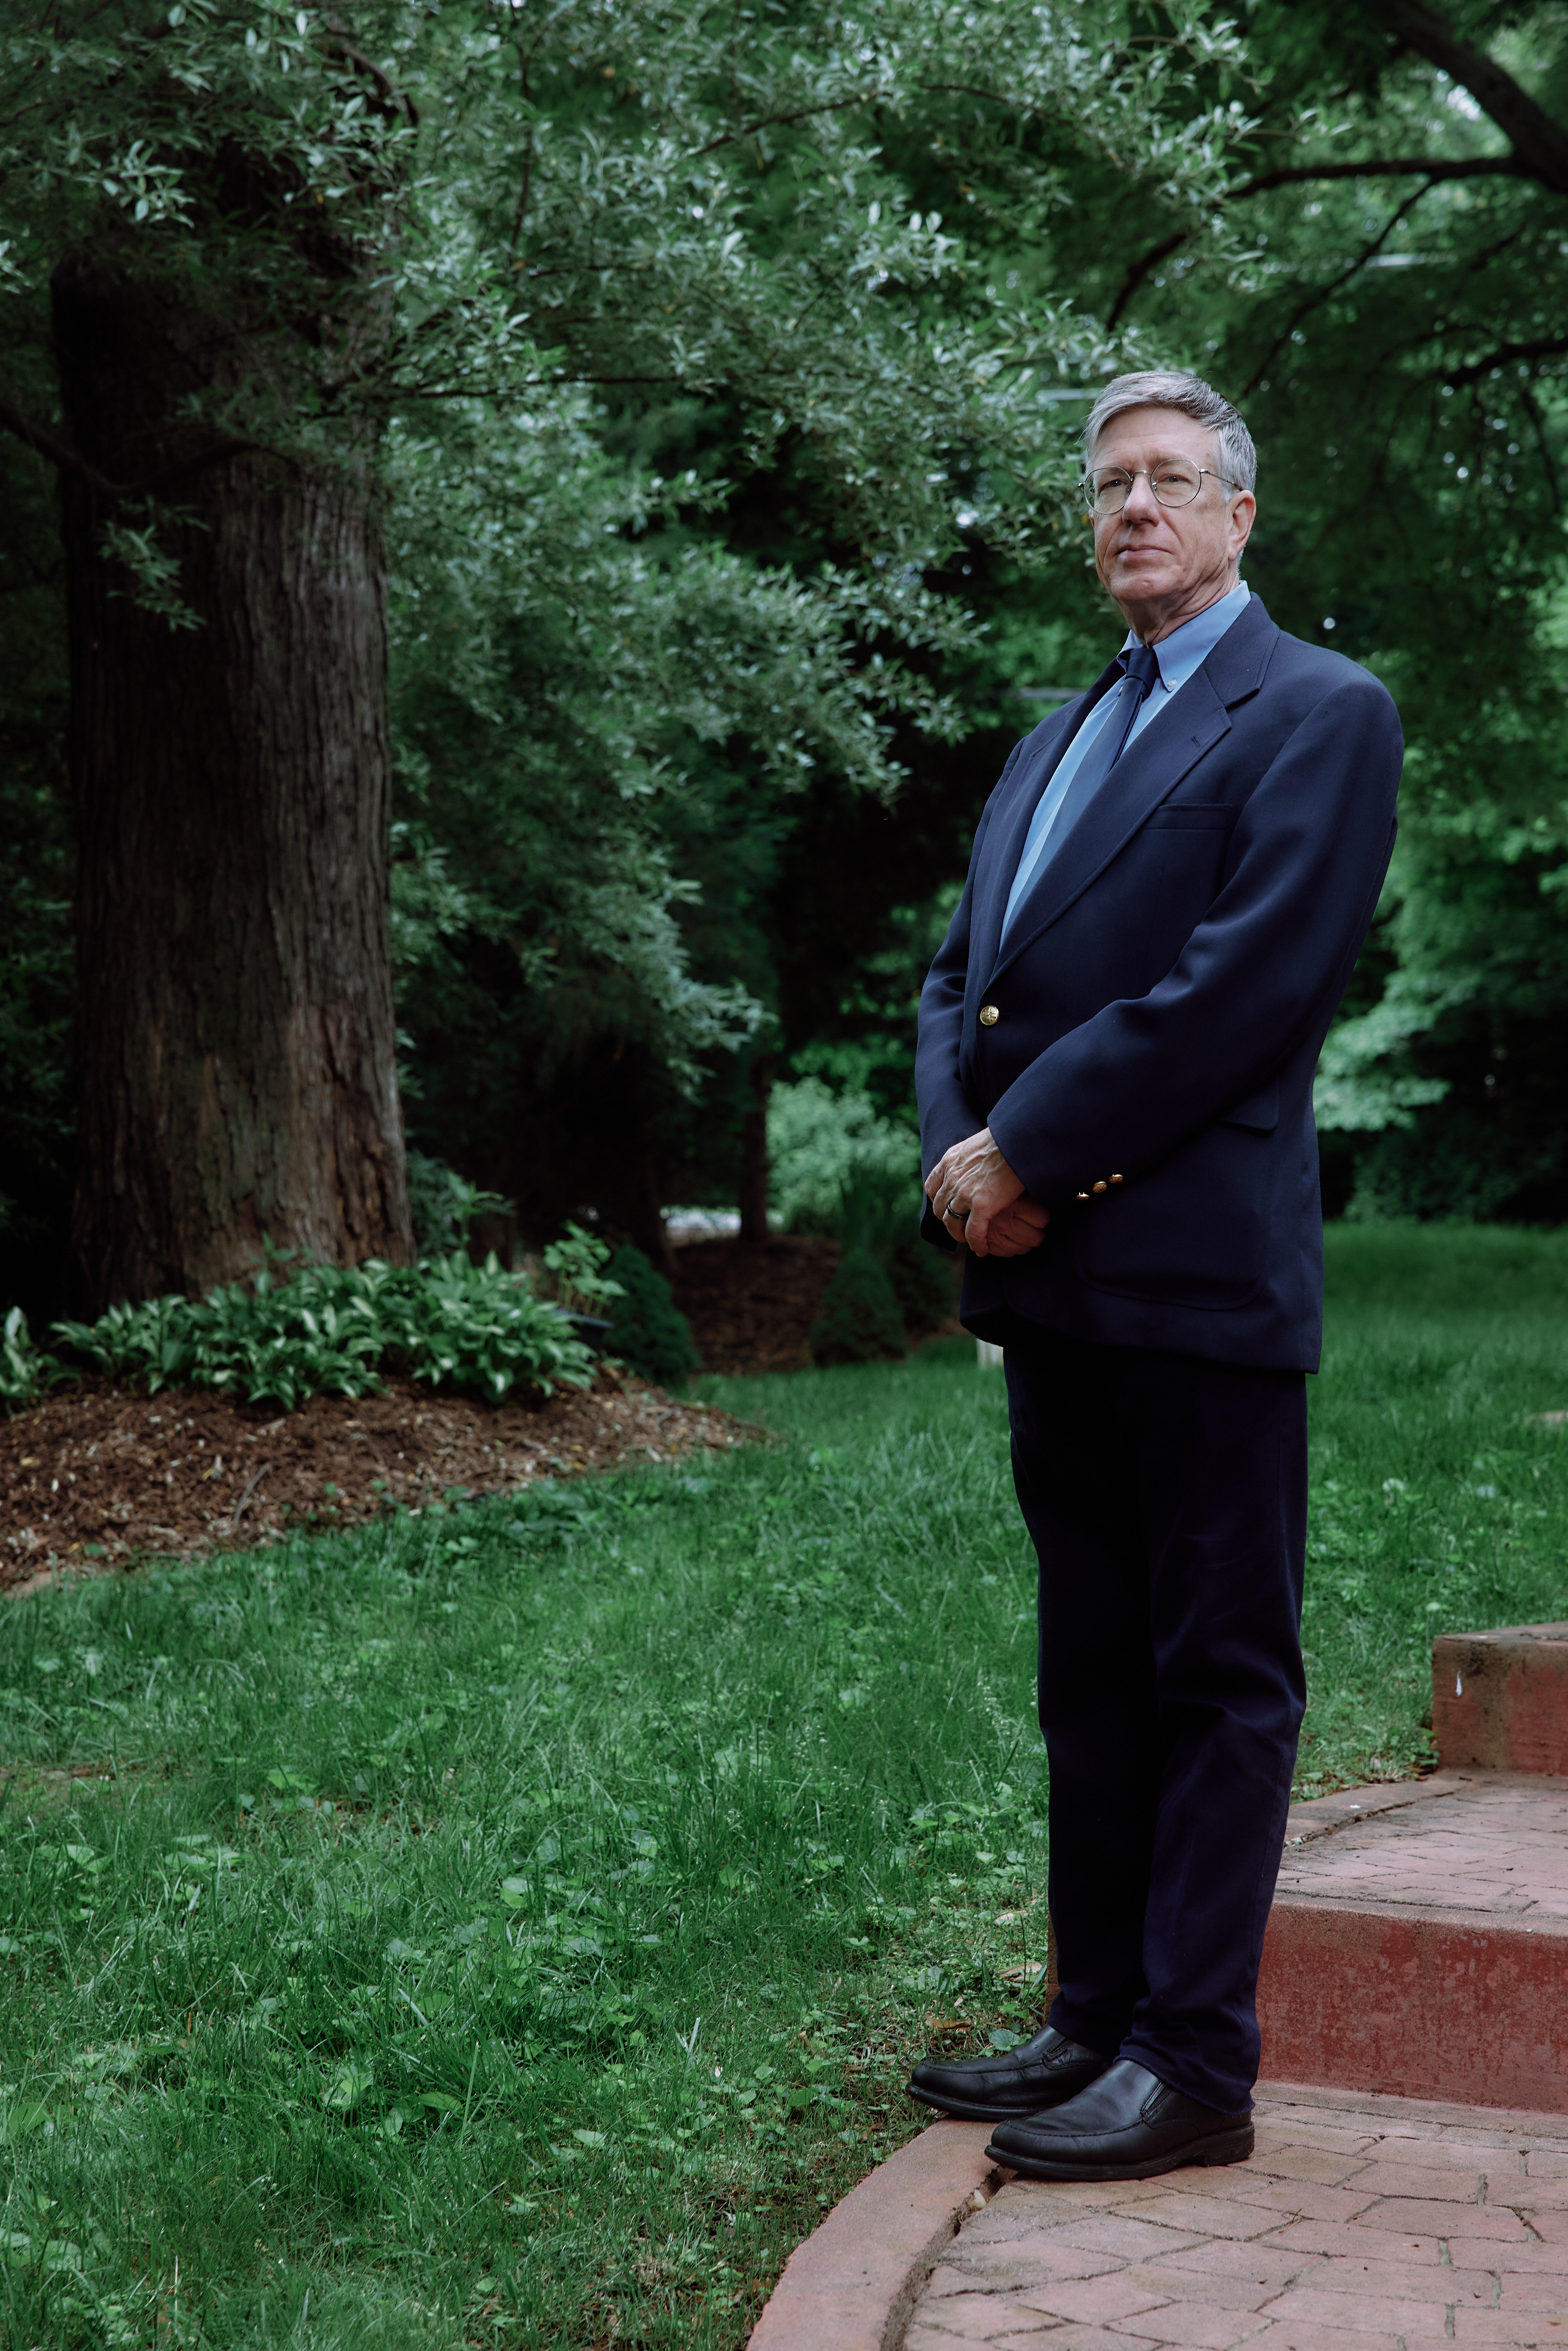 Portrait of a doctor standing outdoors in a serene garden setting. He is dressed in a formal navy blue blazer with gold buttons, a light blue shirt, a dark blue tie, and dark trousers. He looks directly at the camera with a composed expression, his hands clasped in front of him. Large trees and lush greenery provide a natural backdrop, enhancing the dignified atmosphere of the scene.